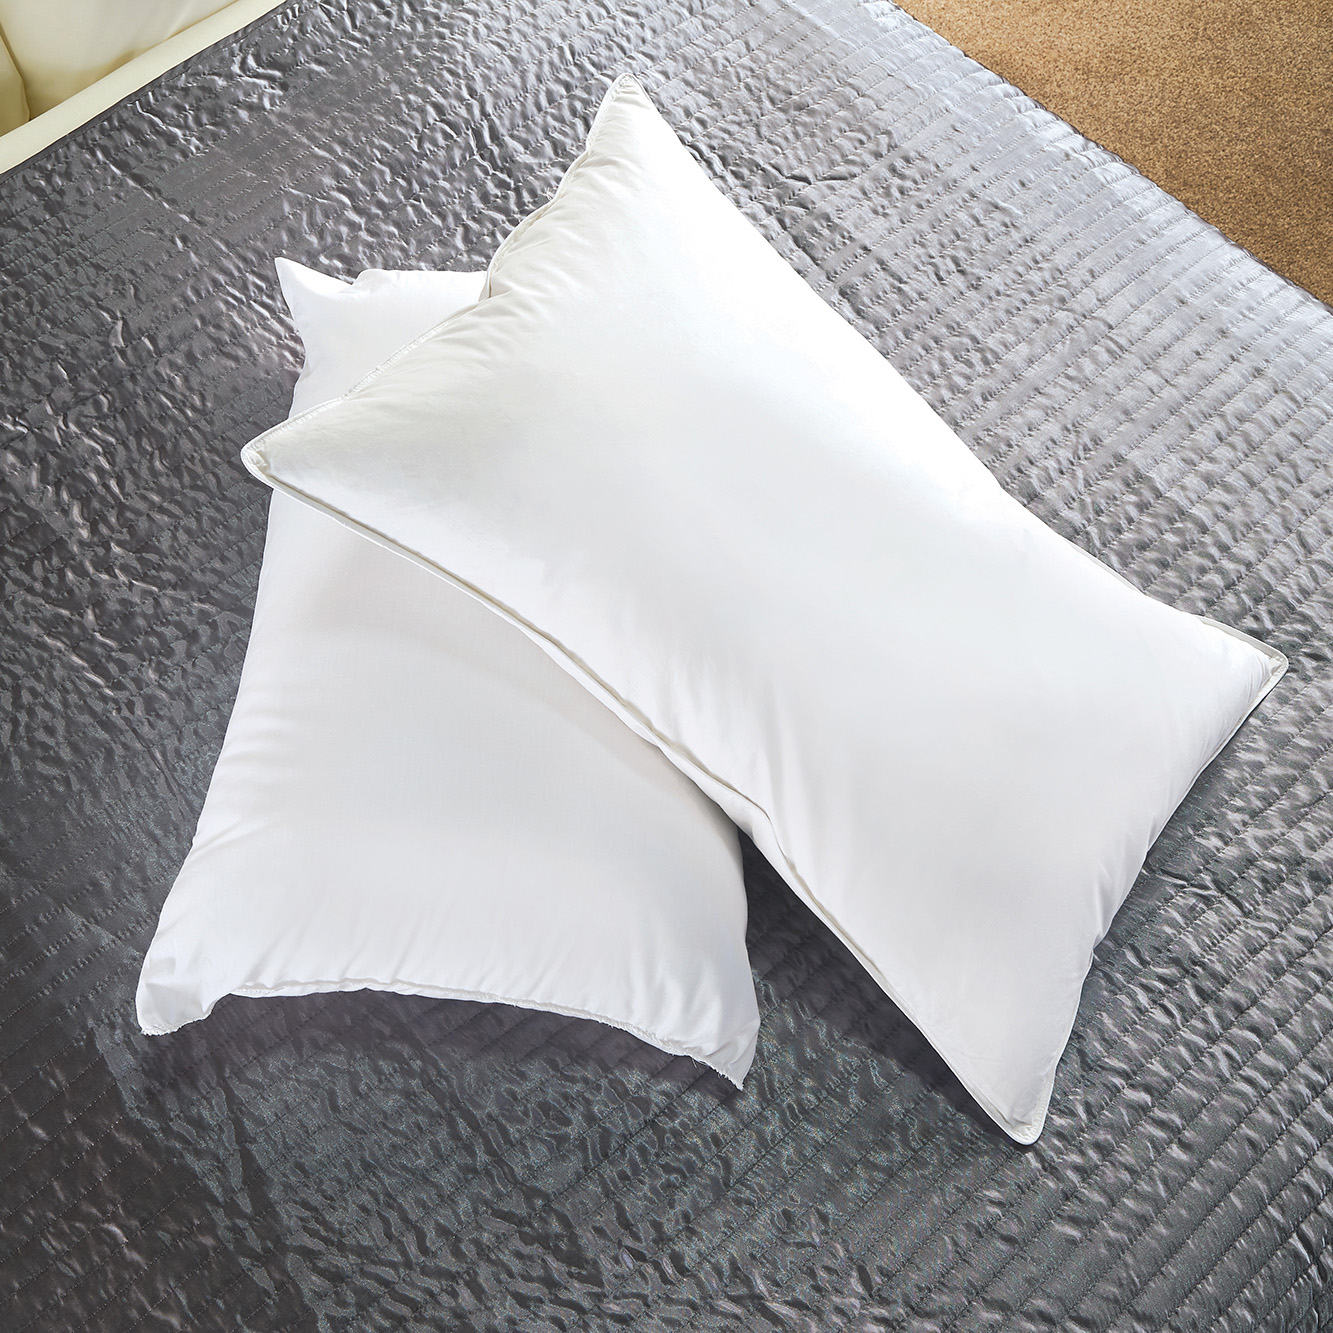 Duck Feather & Down Pillows 